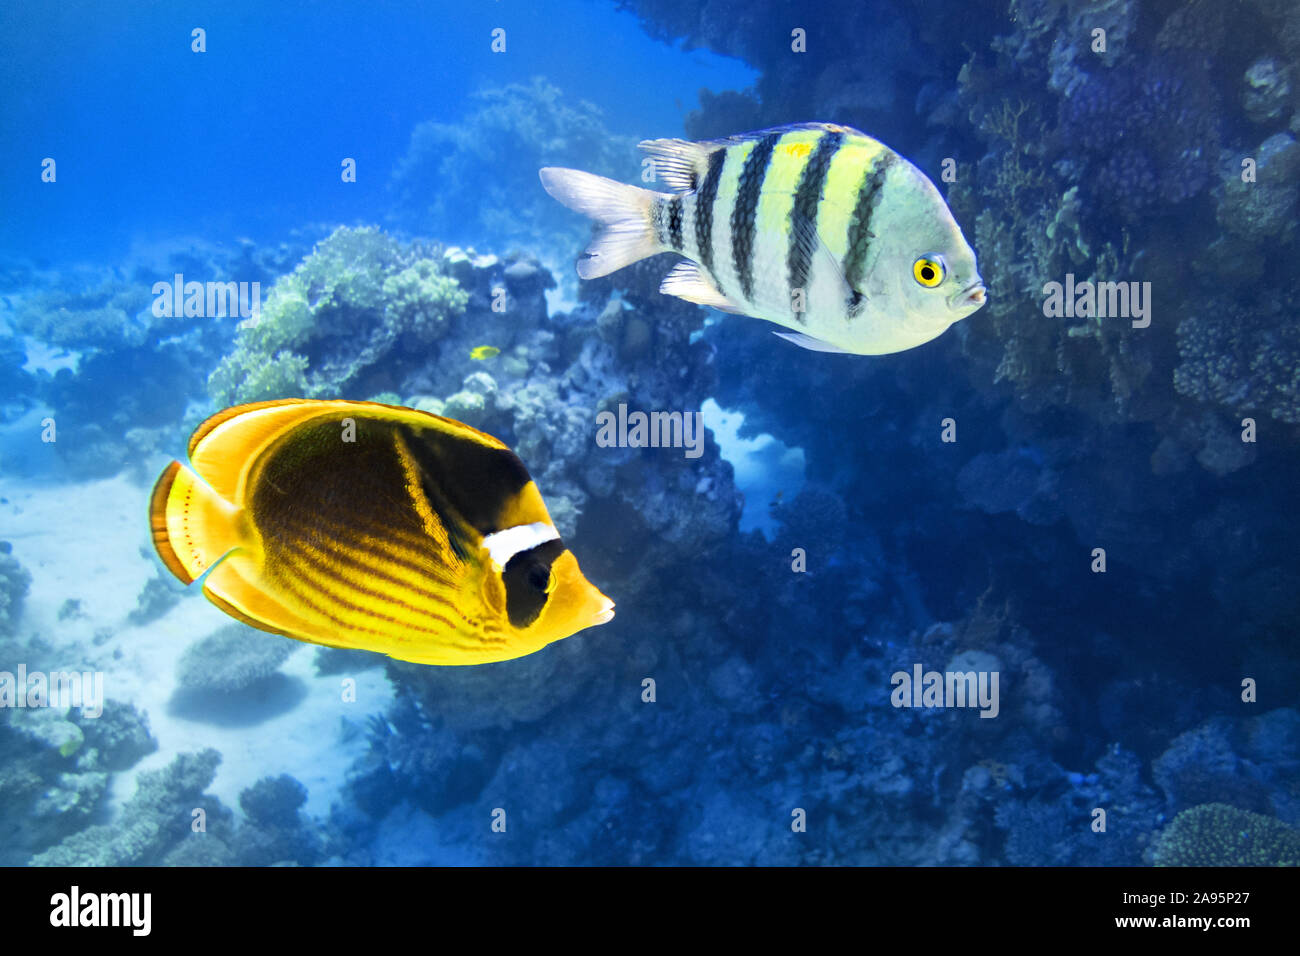 Tropical Fish In The Ocean. Raccoon Butterflyfish And Scissortail Sergeant. Colorful Beauty Stripped Saltwater Fish In The Sea Near Coral Reef. Stock Photo